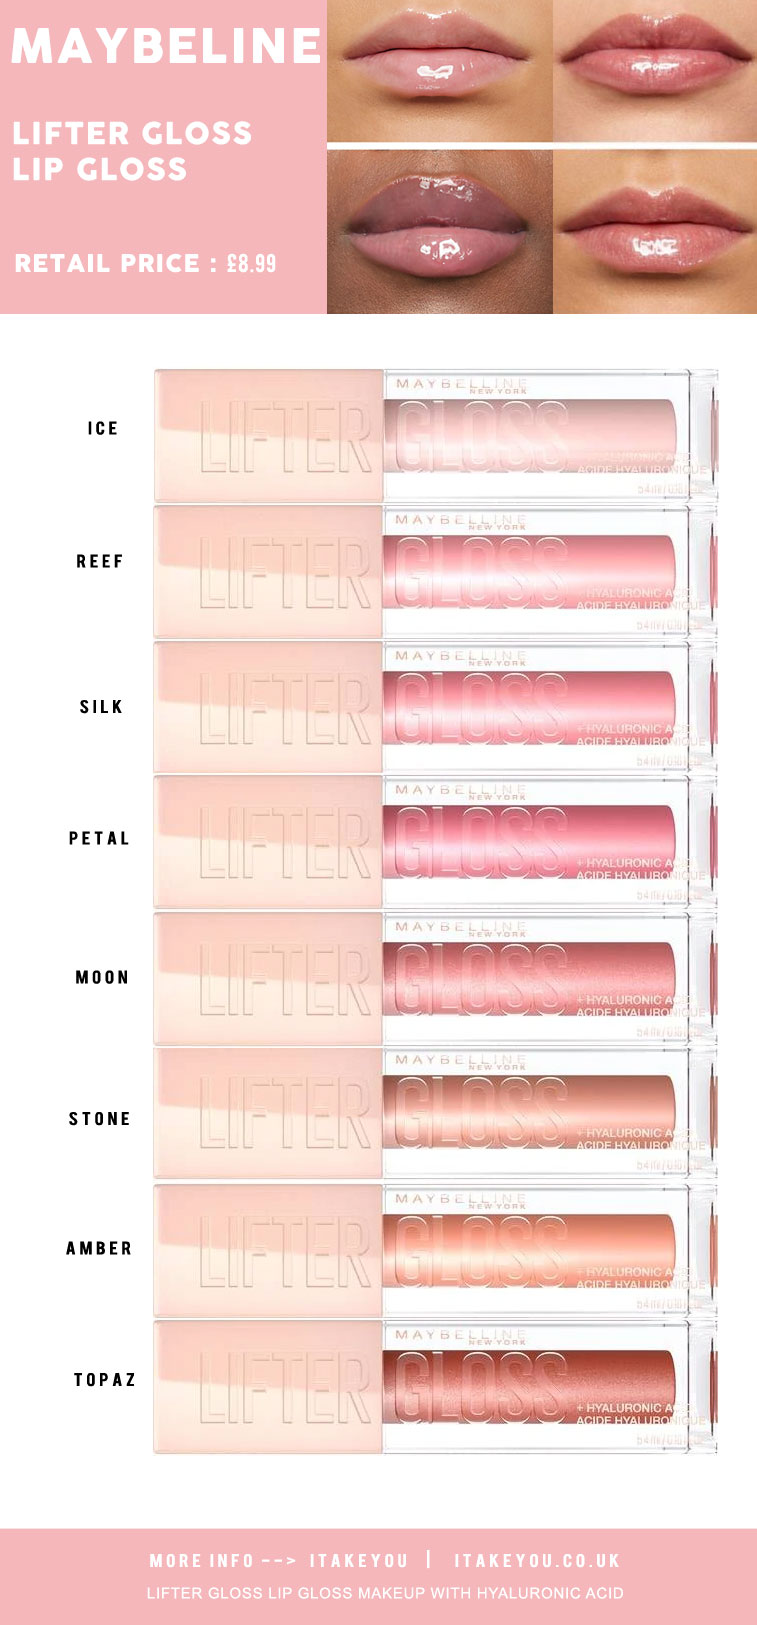 maybelline lifter gloss swatches, maybelline lifter gloss , maybelline lifter gloss boots, maybelline lifter gloss superdrug, maybelline lifter gloss moon, maybelline lip lifter gloss swatches, maybelline lifter gloss silk, pumping lip gloss, maybelline liftter gloss